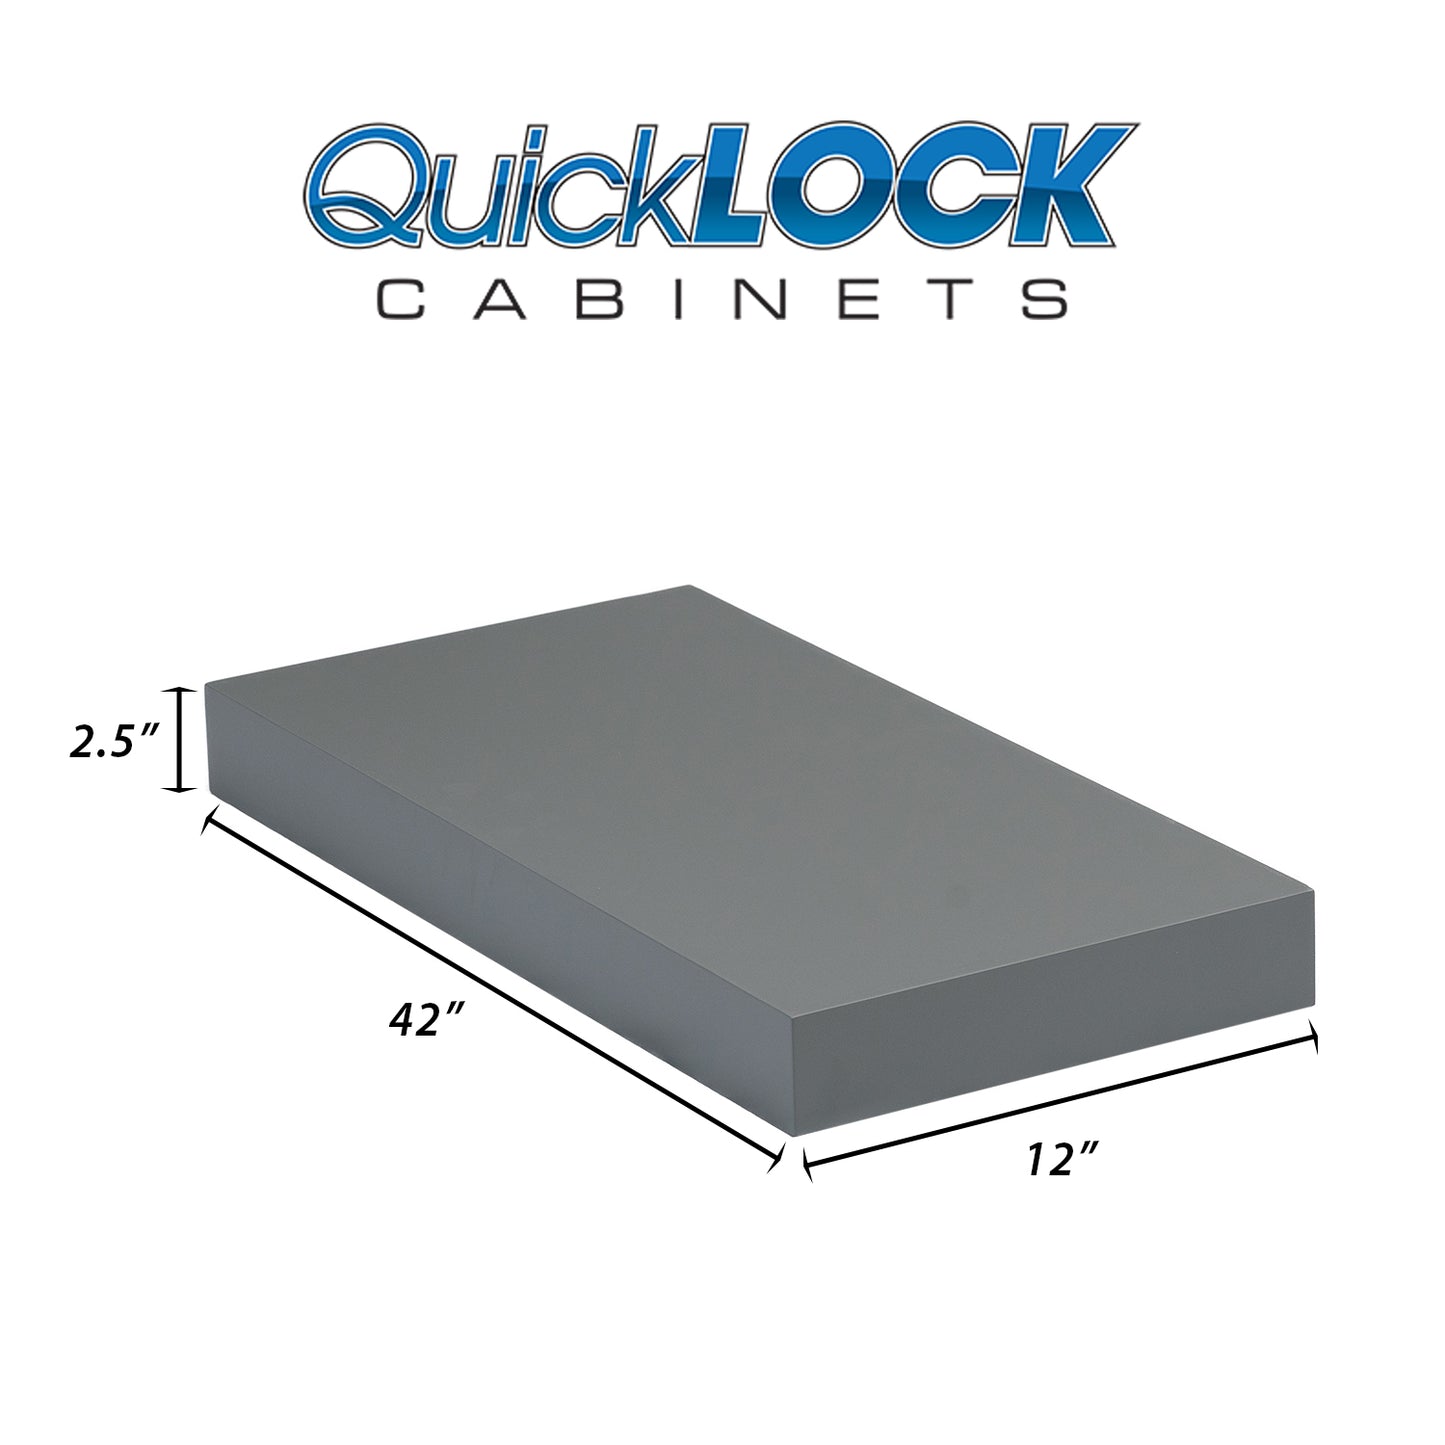 Quicklock Cabinets Floating Shelves | 2.5" Thick | Magnetic Gray, 12" D x 42" W x 2.5" H | American Made | Hardwood Bracket | Complete Shelf Unit